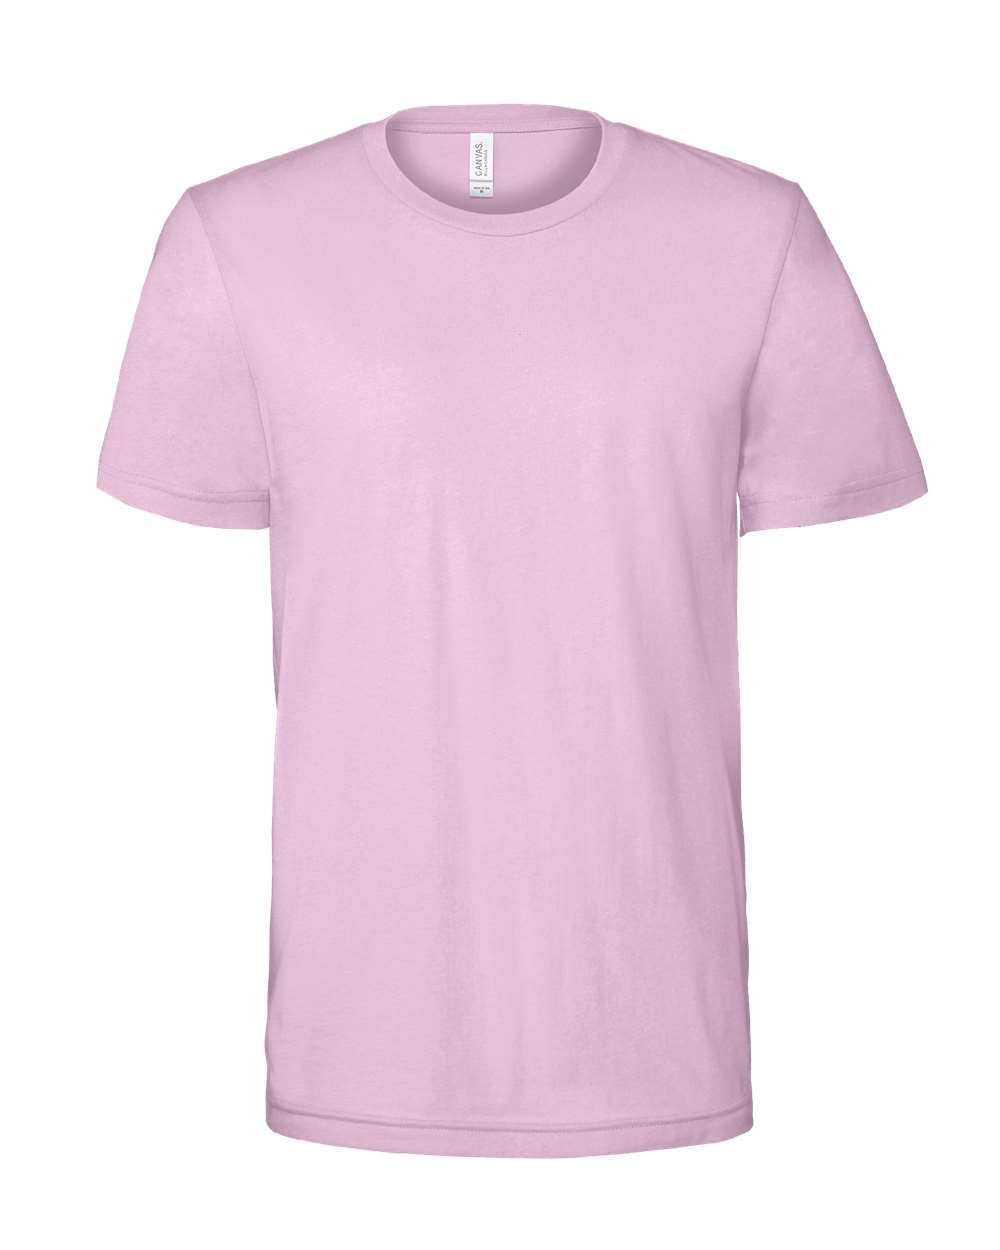 Jersey Tee Child Product 2